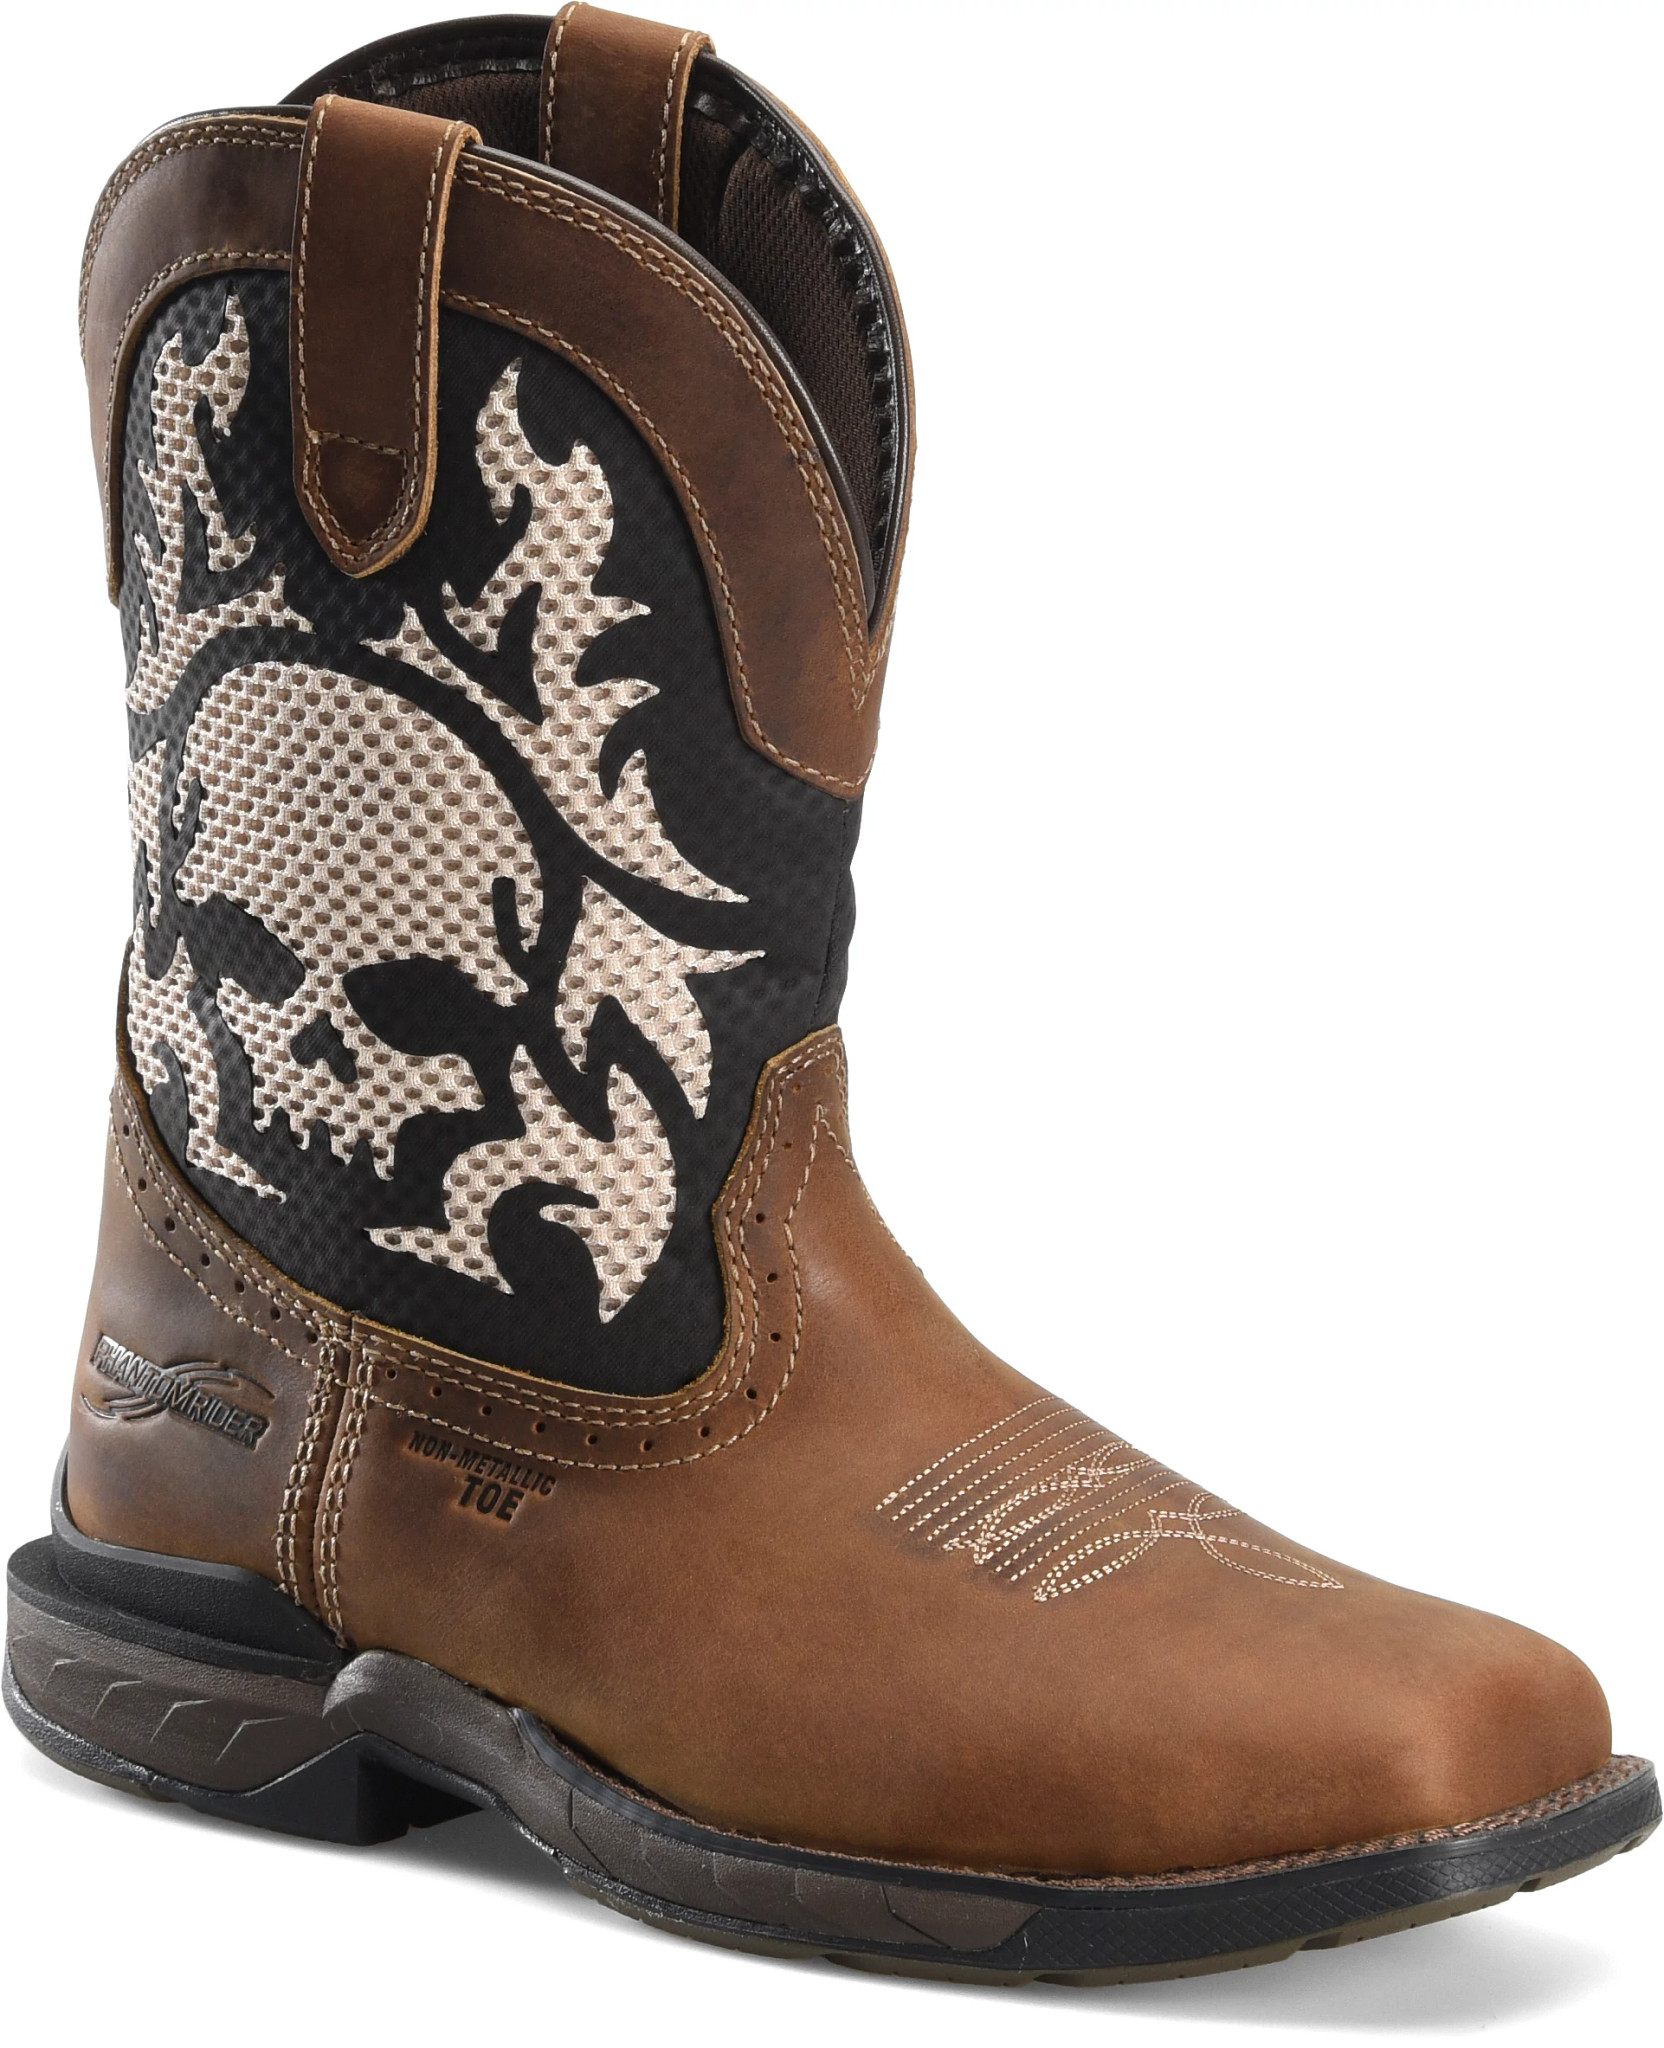 Men's Boots and Footwear | Double-H Boots